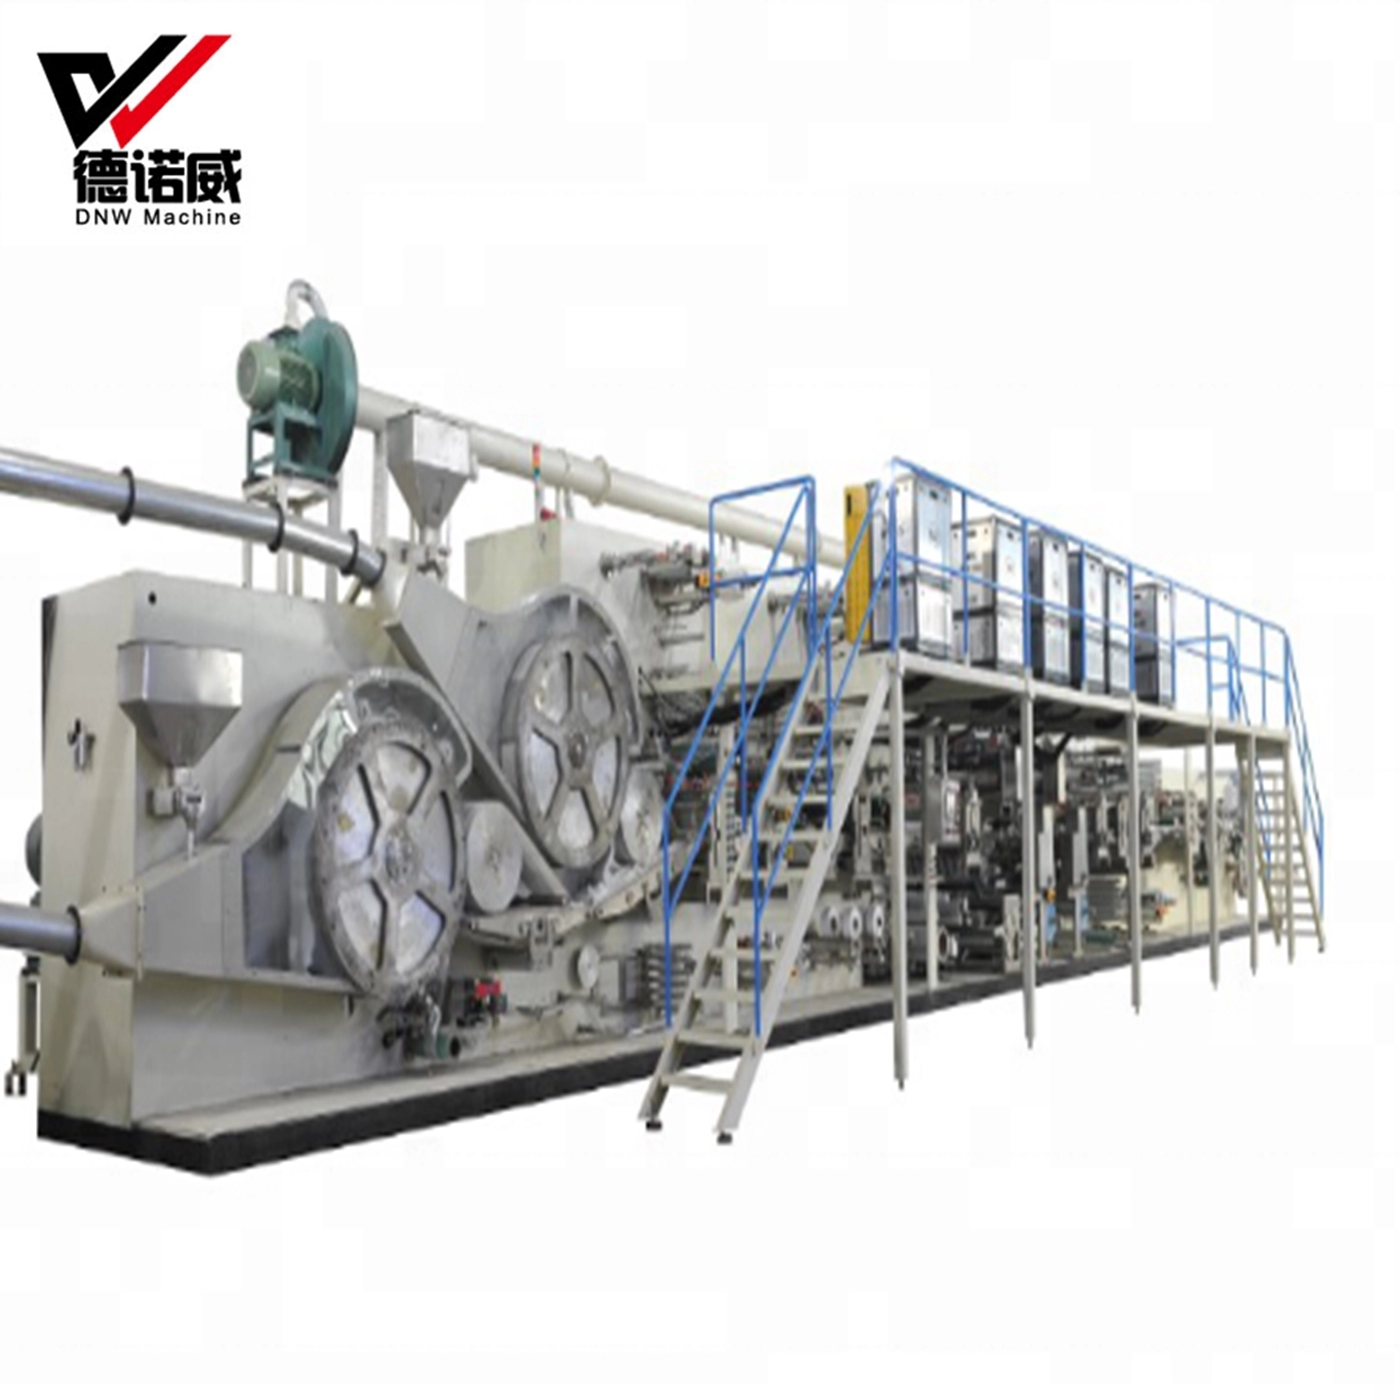 China Supplier Newest CE approved Efficiency New small production line of Adult Diaper Machine